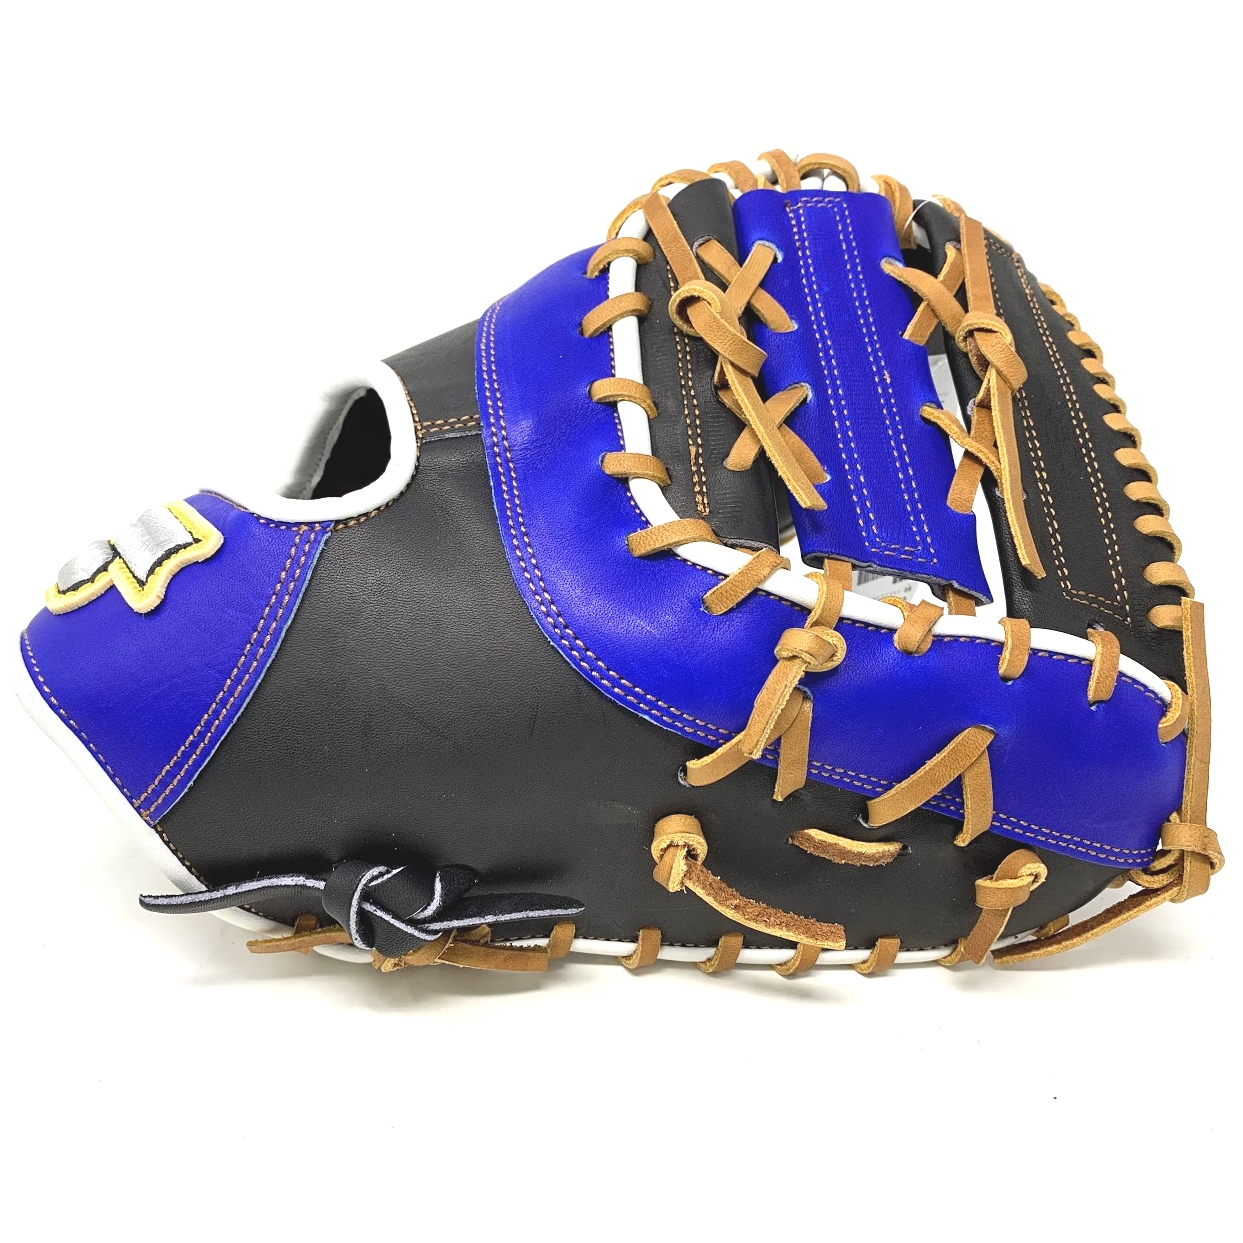 The SSK Taiwan Silver Series is made for players who had passed the intro stages of ball to the advanced. SSK strictly picked the strong US Steerhide and shaped them with the most fashionable style.  US Steerhide from the North American cattle, which is about 18 months old, has been produced and tanned by Taiwanese professional leather factories. Taiwan factories tend to produce baseball gloves with goal of being thick and durable. The factories employ senior craftsman to adjust the shape of the gloves so that players can limit the break in time. The glove of this series is still considered somewhat rigid, and players need some time to break in it and put it into the field. US Steerhide has currently become one of the most widely adopted high-class leather on the market. For SSK Silver Series, the thumb/pinky will be extended to fingertips, which will strengthen the structure and have good control of the glove.